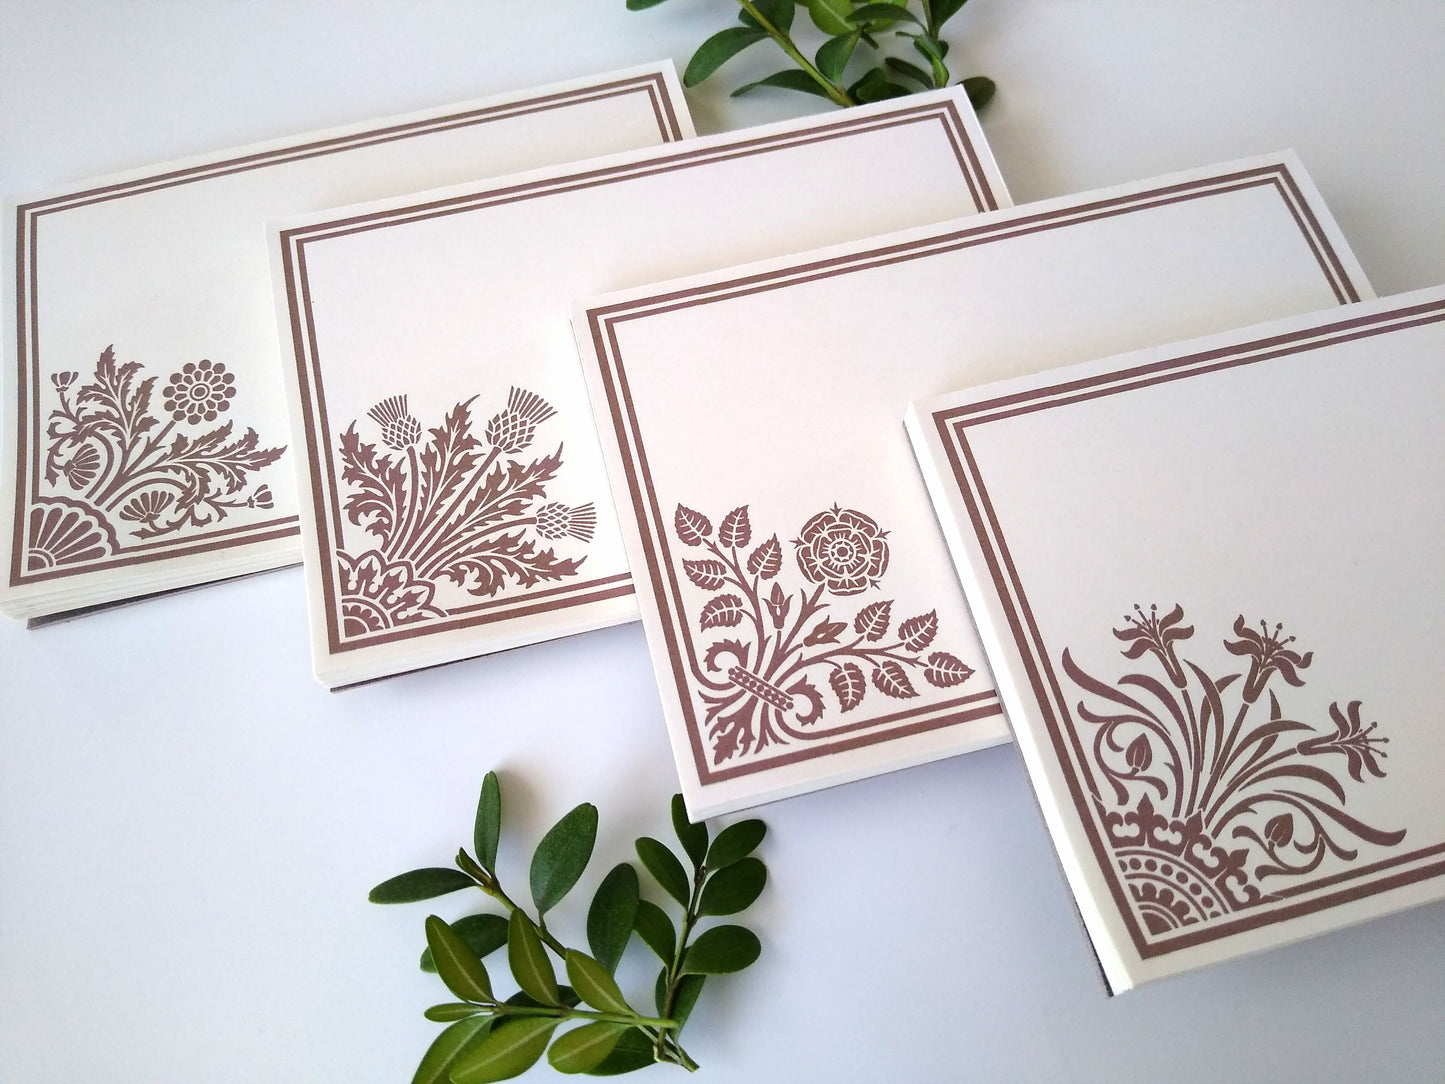 Four cream colored notepads at an angle on a white background. Sprigs of leaves rest around them. Each notepad has a stylized floral design in tan in the lower left corner with a double line border around the rest of the notepad.